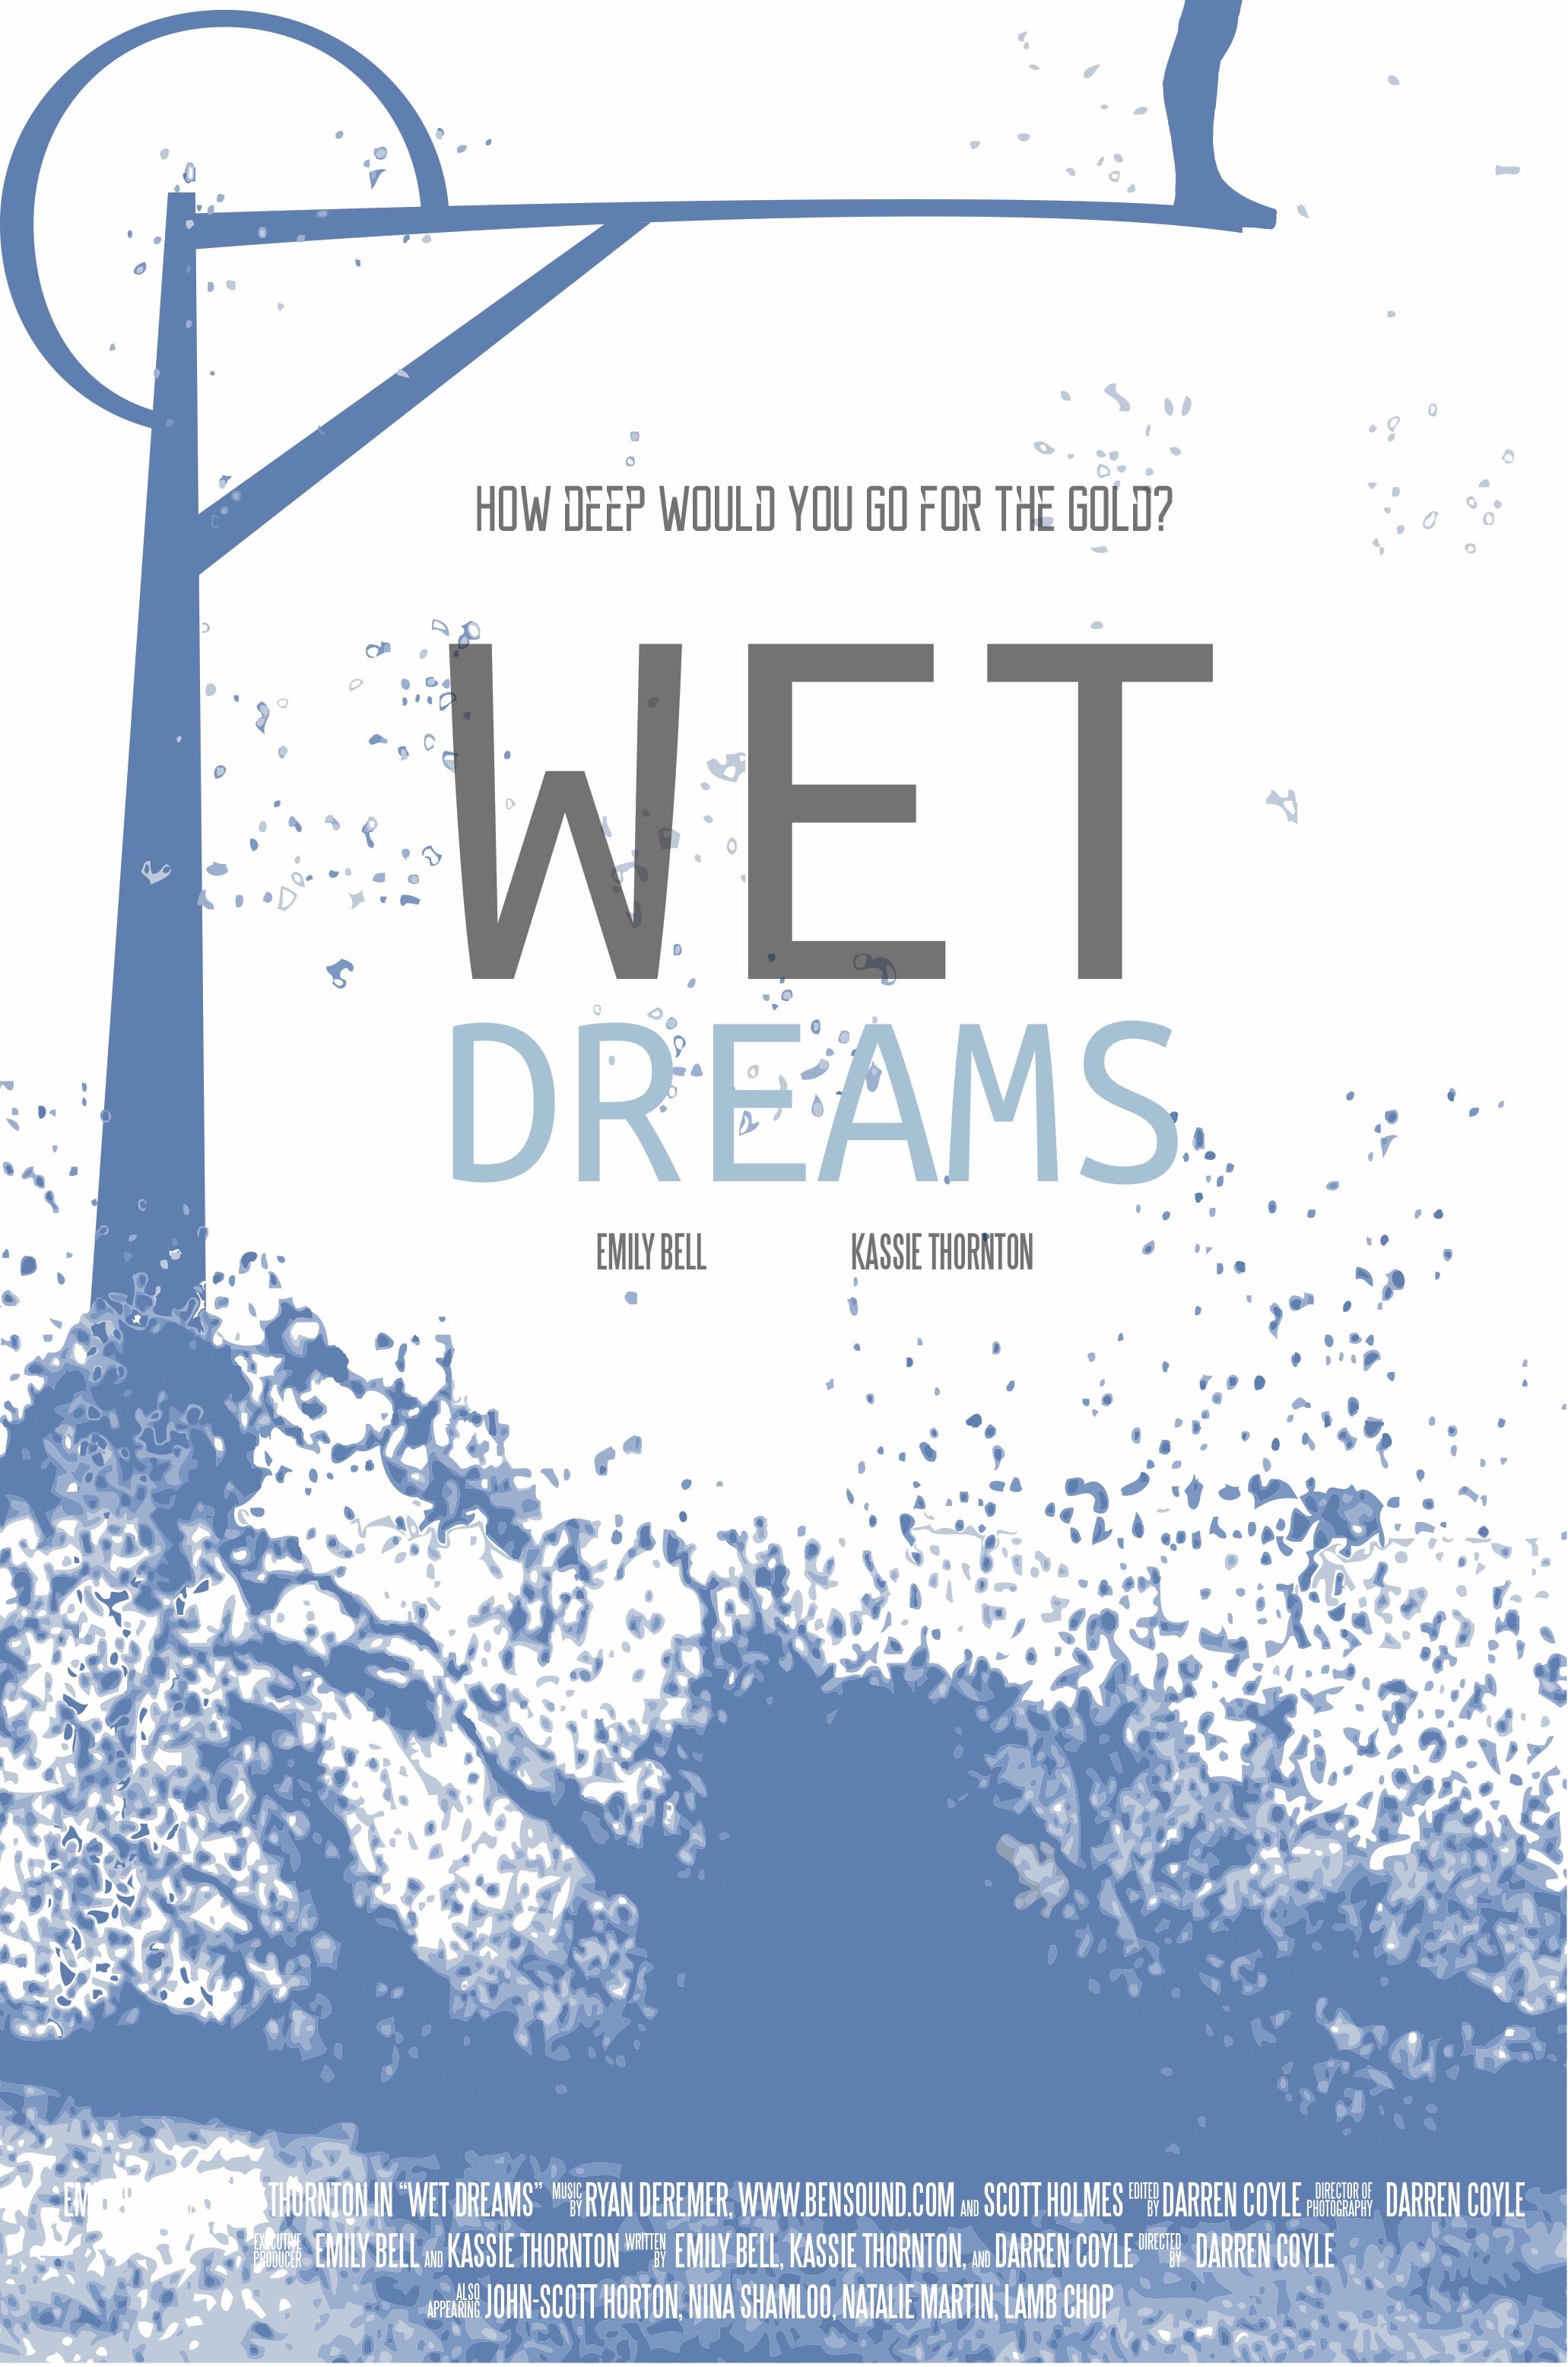 WET DREAMS - mockumentary short, directed and edited by Darren Coyle